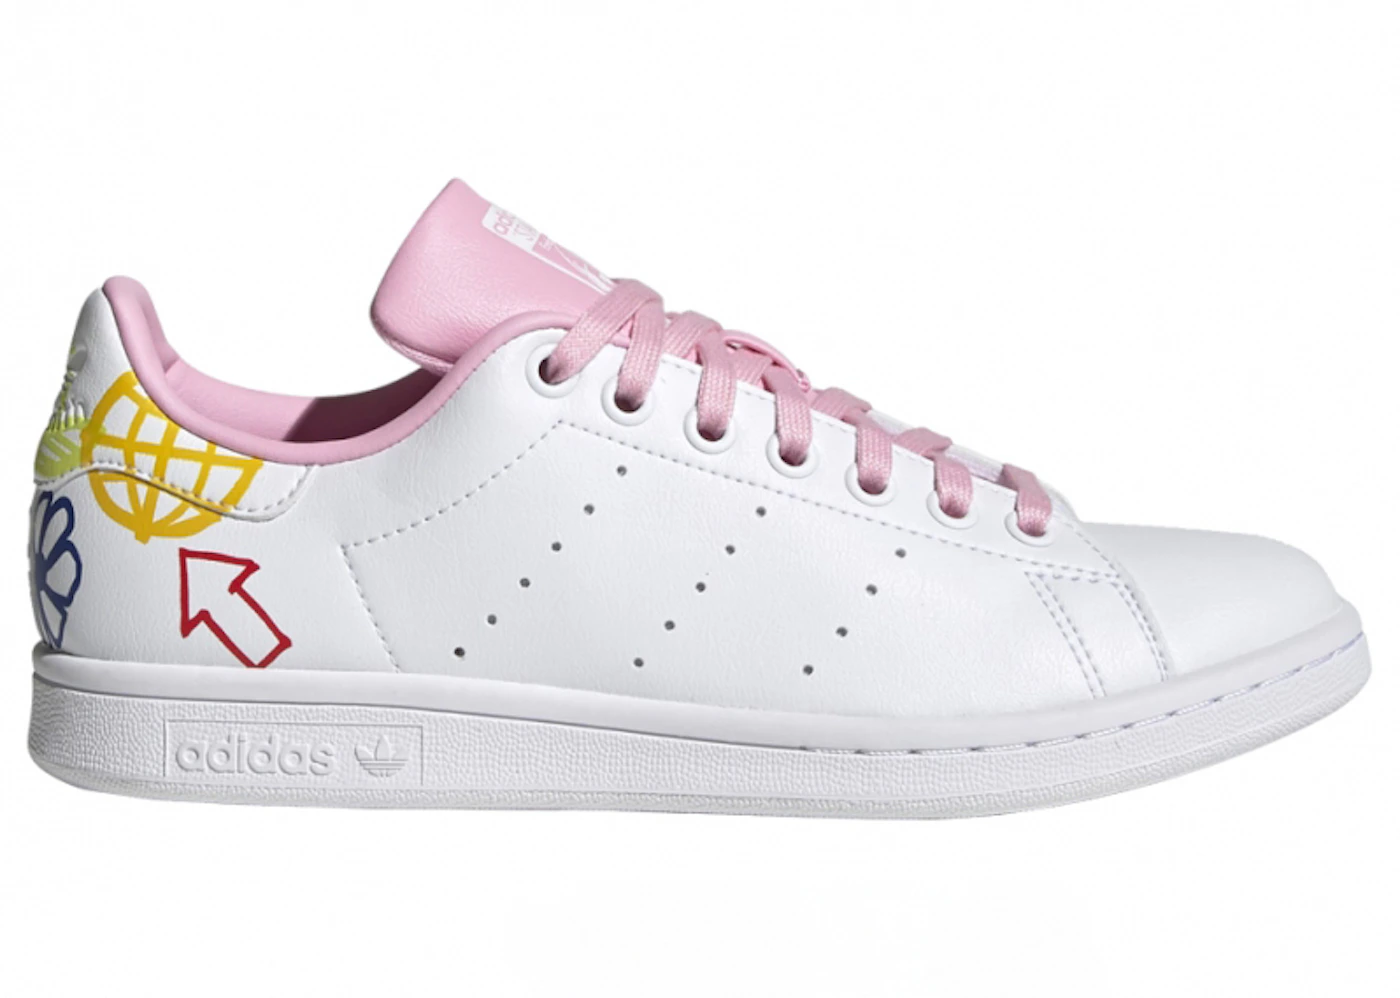 Women's Adidas Stan Smith FX5653 White Multicolor Floral – Sneaker Junkies